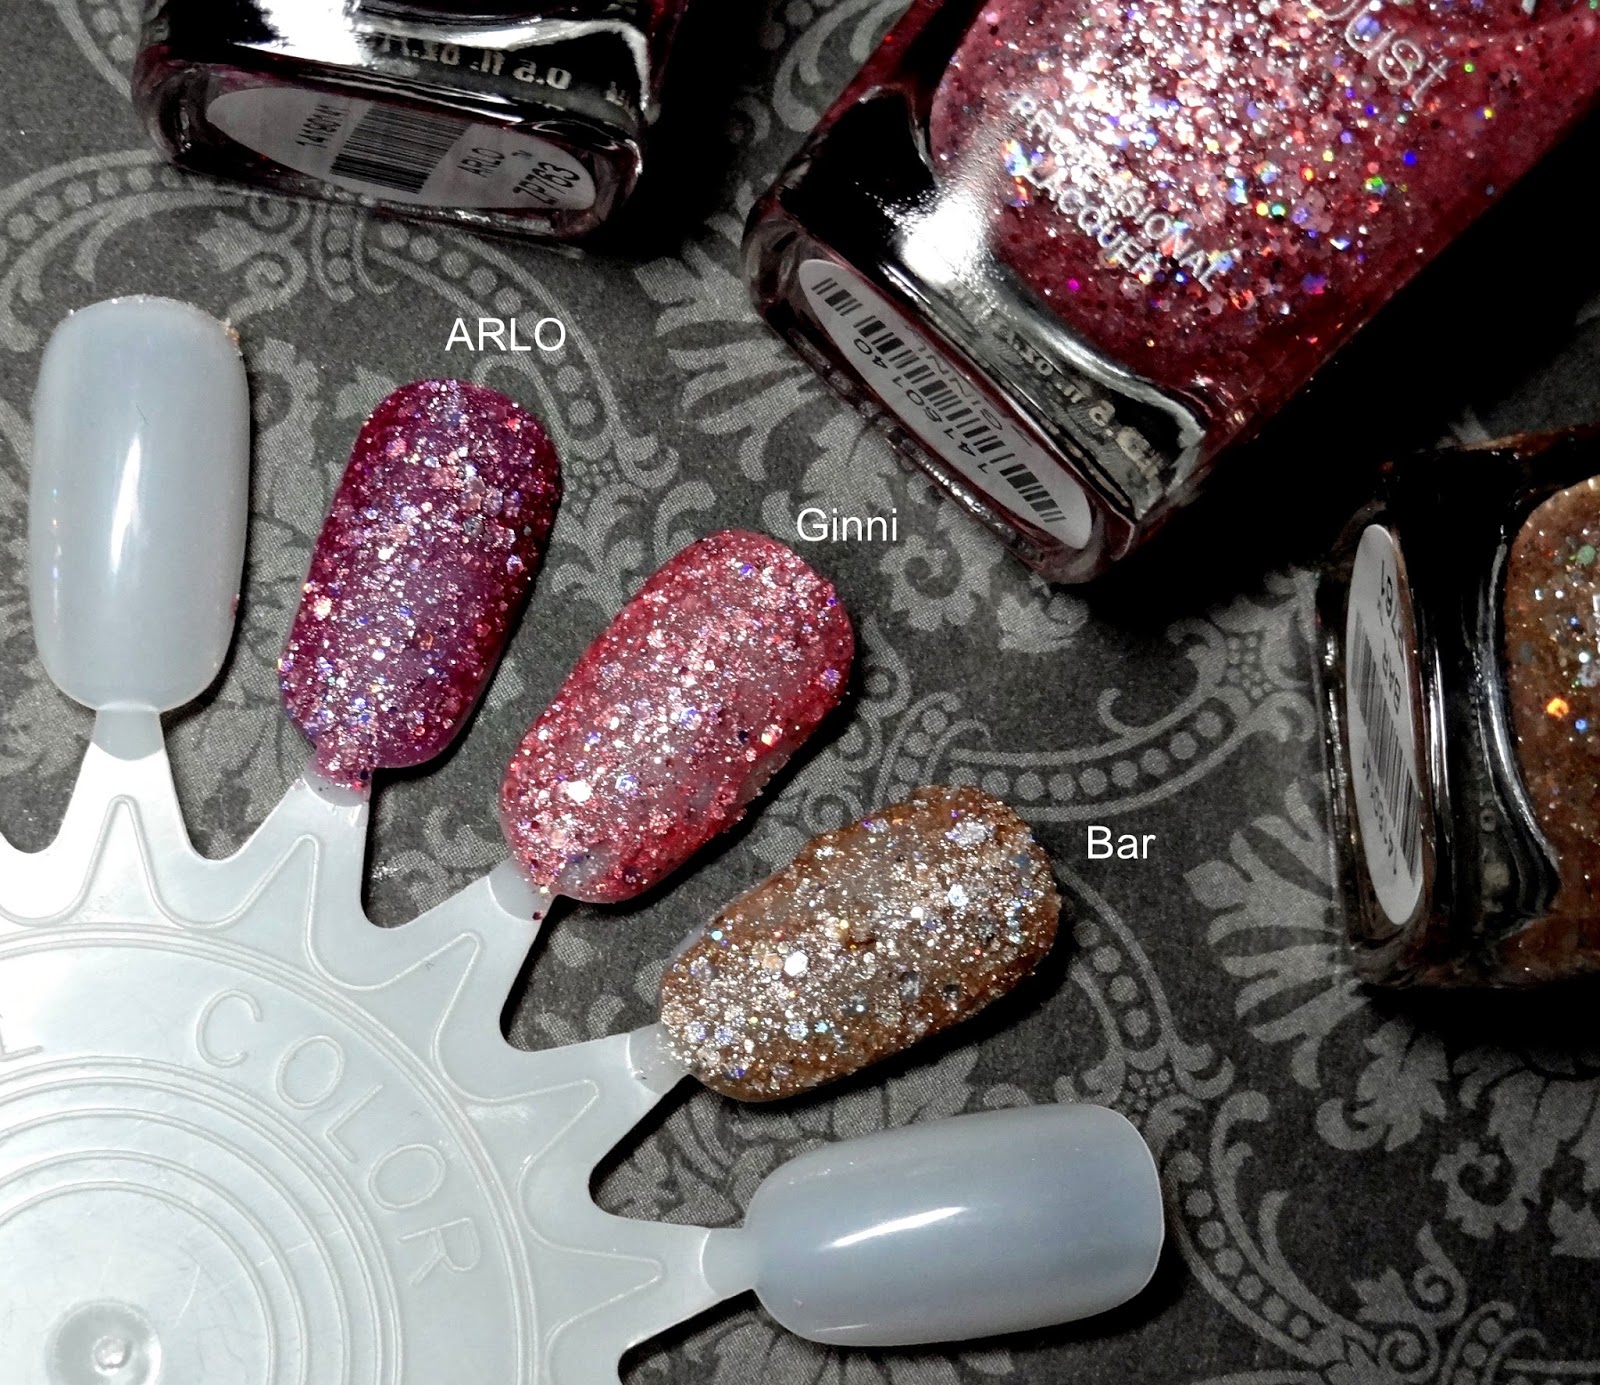 ZOYA Magical Pixie Summer 2014 Collection Review, Photos & Swatches Arlo Ginni Bar